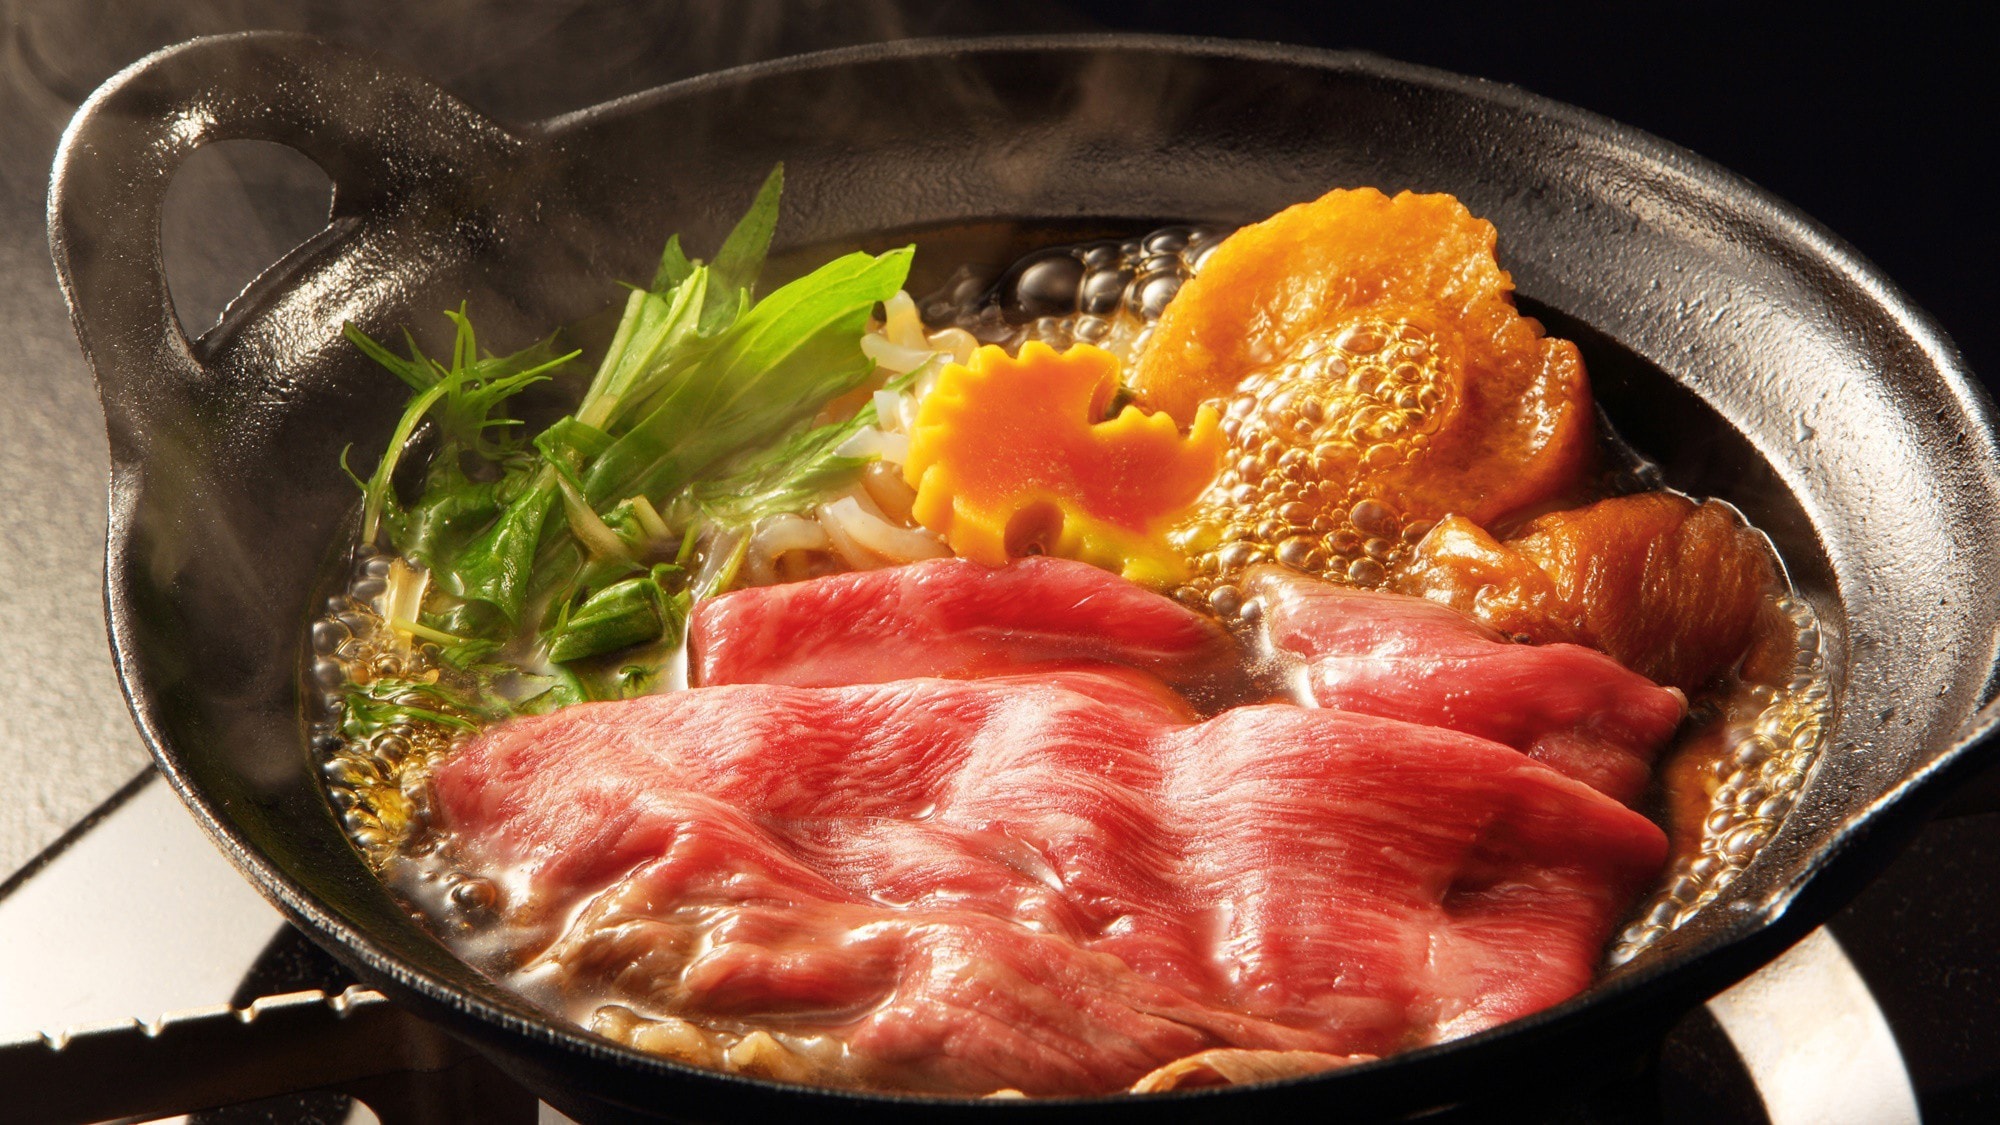 [Yamagata beef sukiyaki] Yamagata beef sukiyaki, which is on par with Yonezawa beef, is made with a soft-boiled egg. Yusa's classic main dish